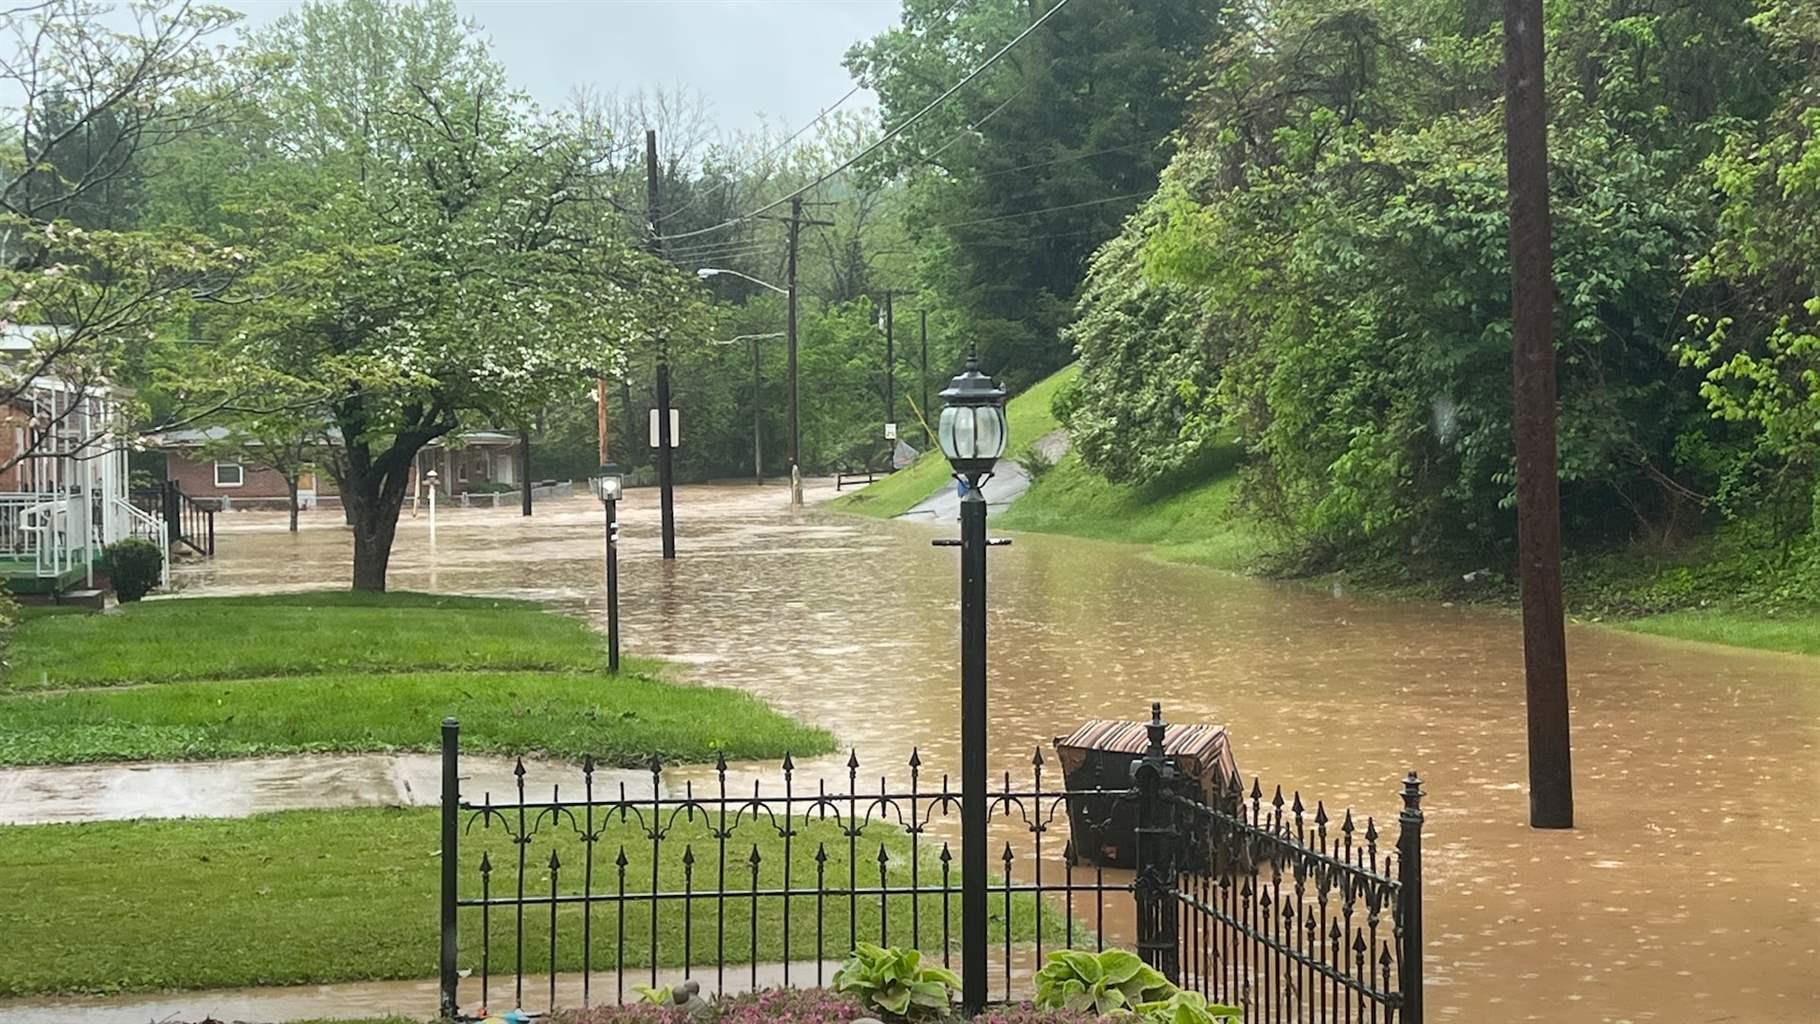 This May 6, 2022, flood in Enslow Park, a community in Huntington, West Virginia, made roads impassable and damaged vehicles and homes. Some residents had to be rescued from the rising water. 